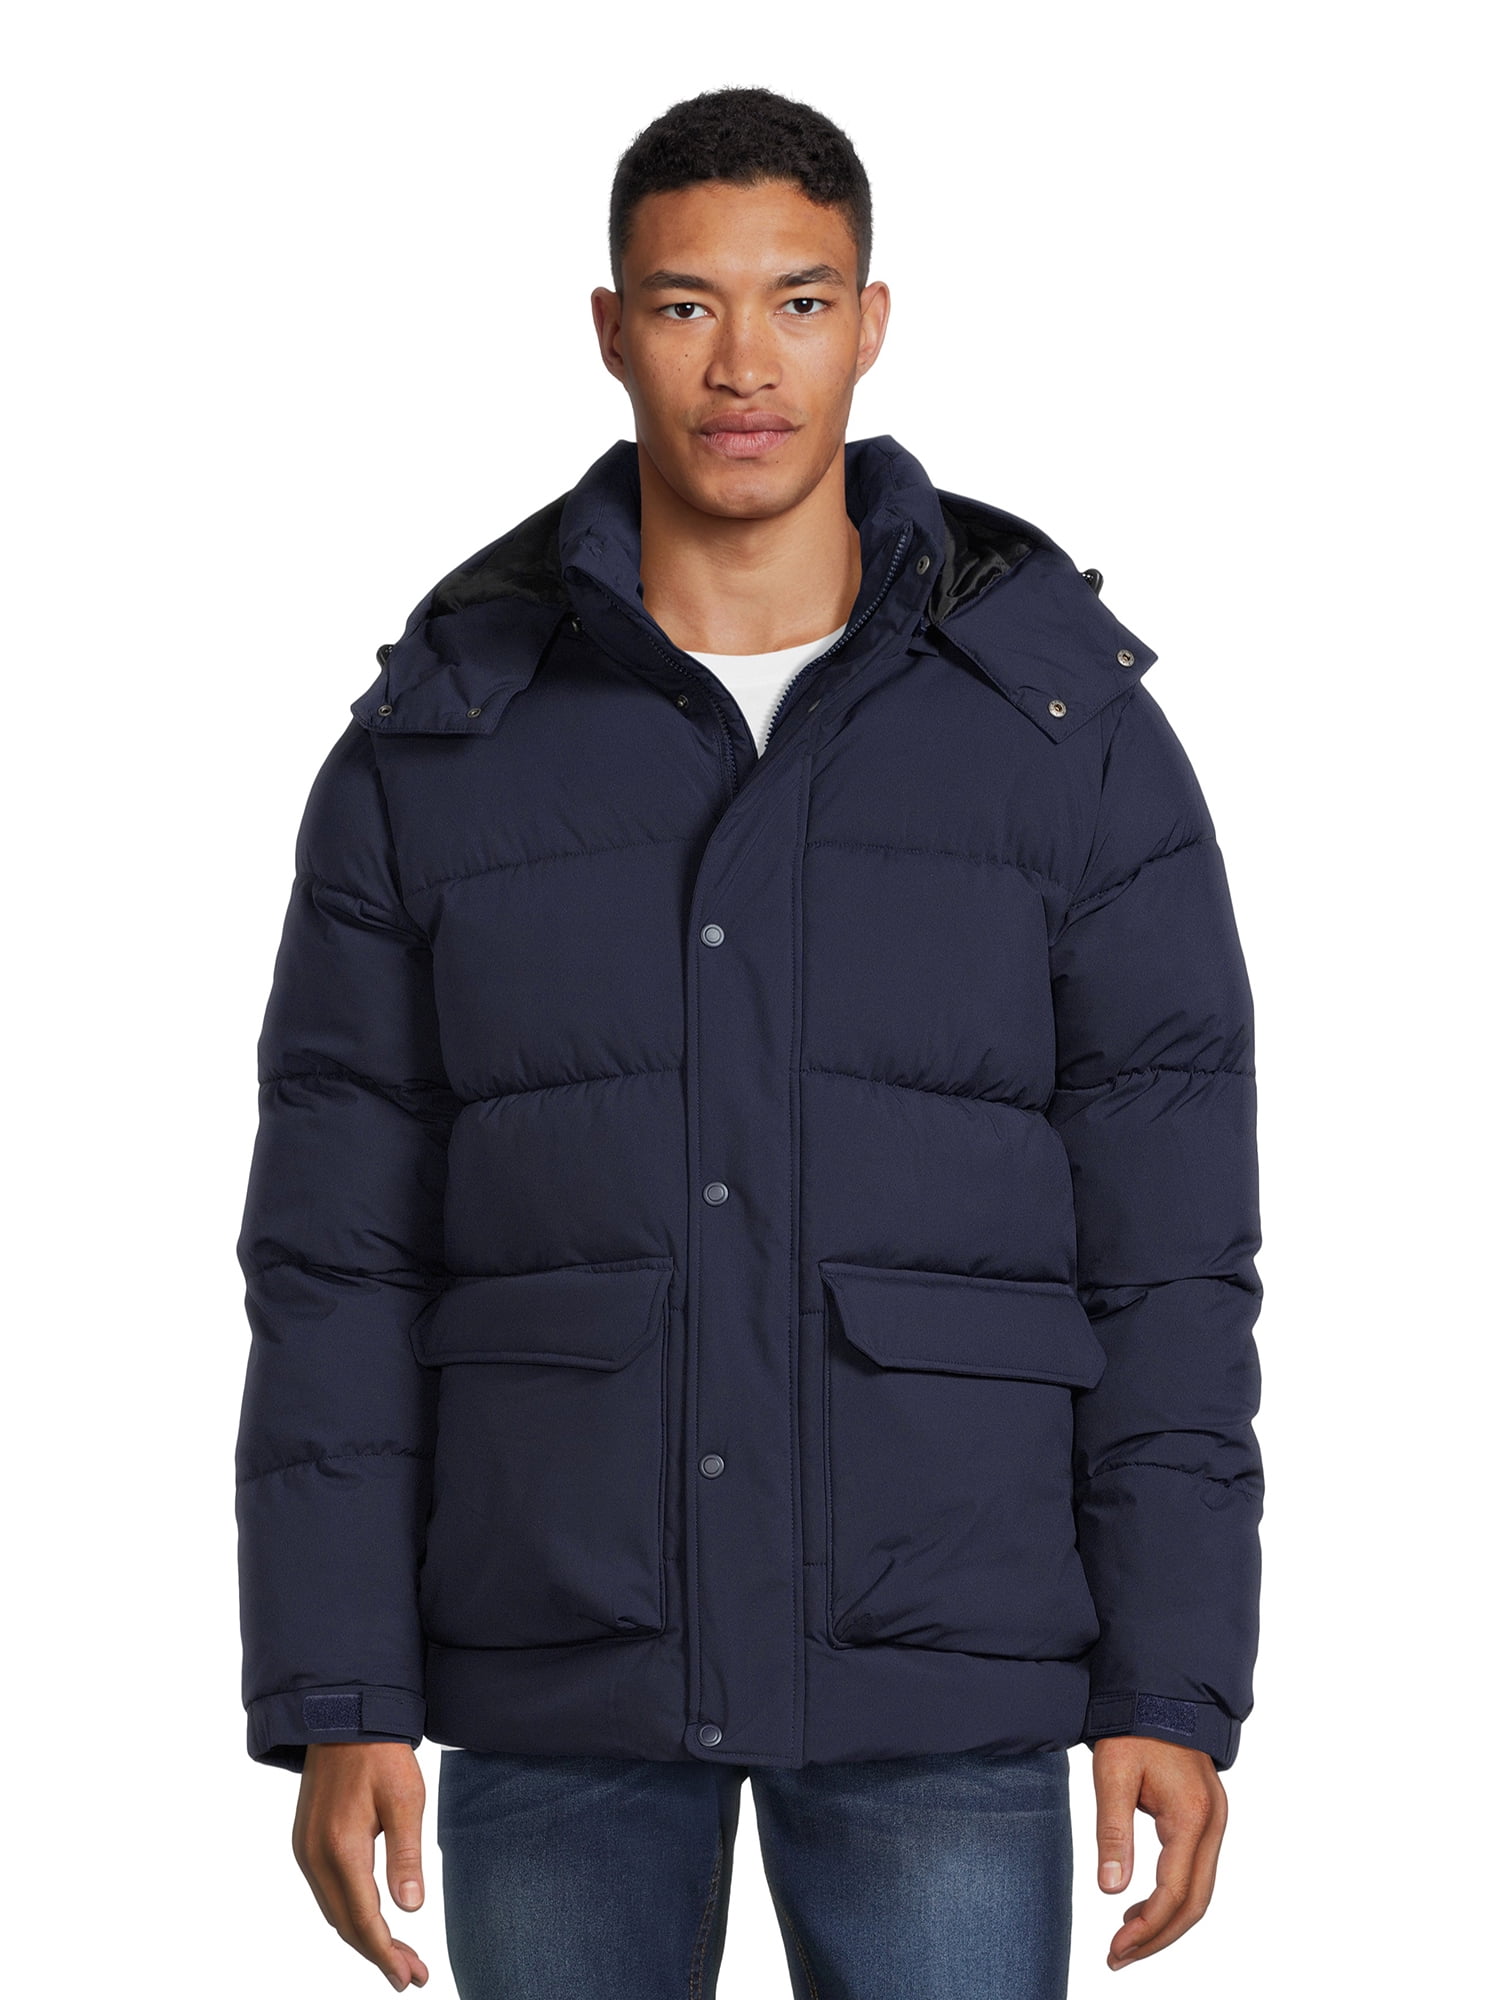 Swiss Tech Men's Quilted Puffer Jacket with Removable Hood, Sizes S-3XL ...